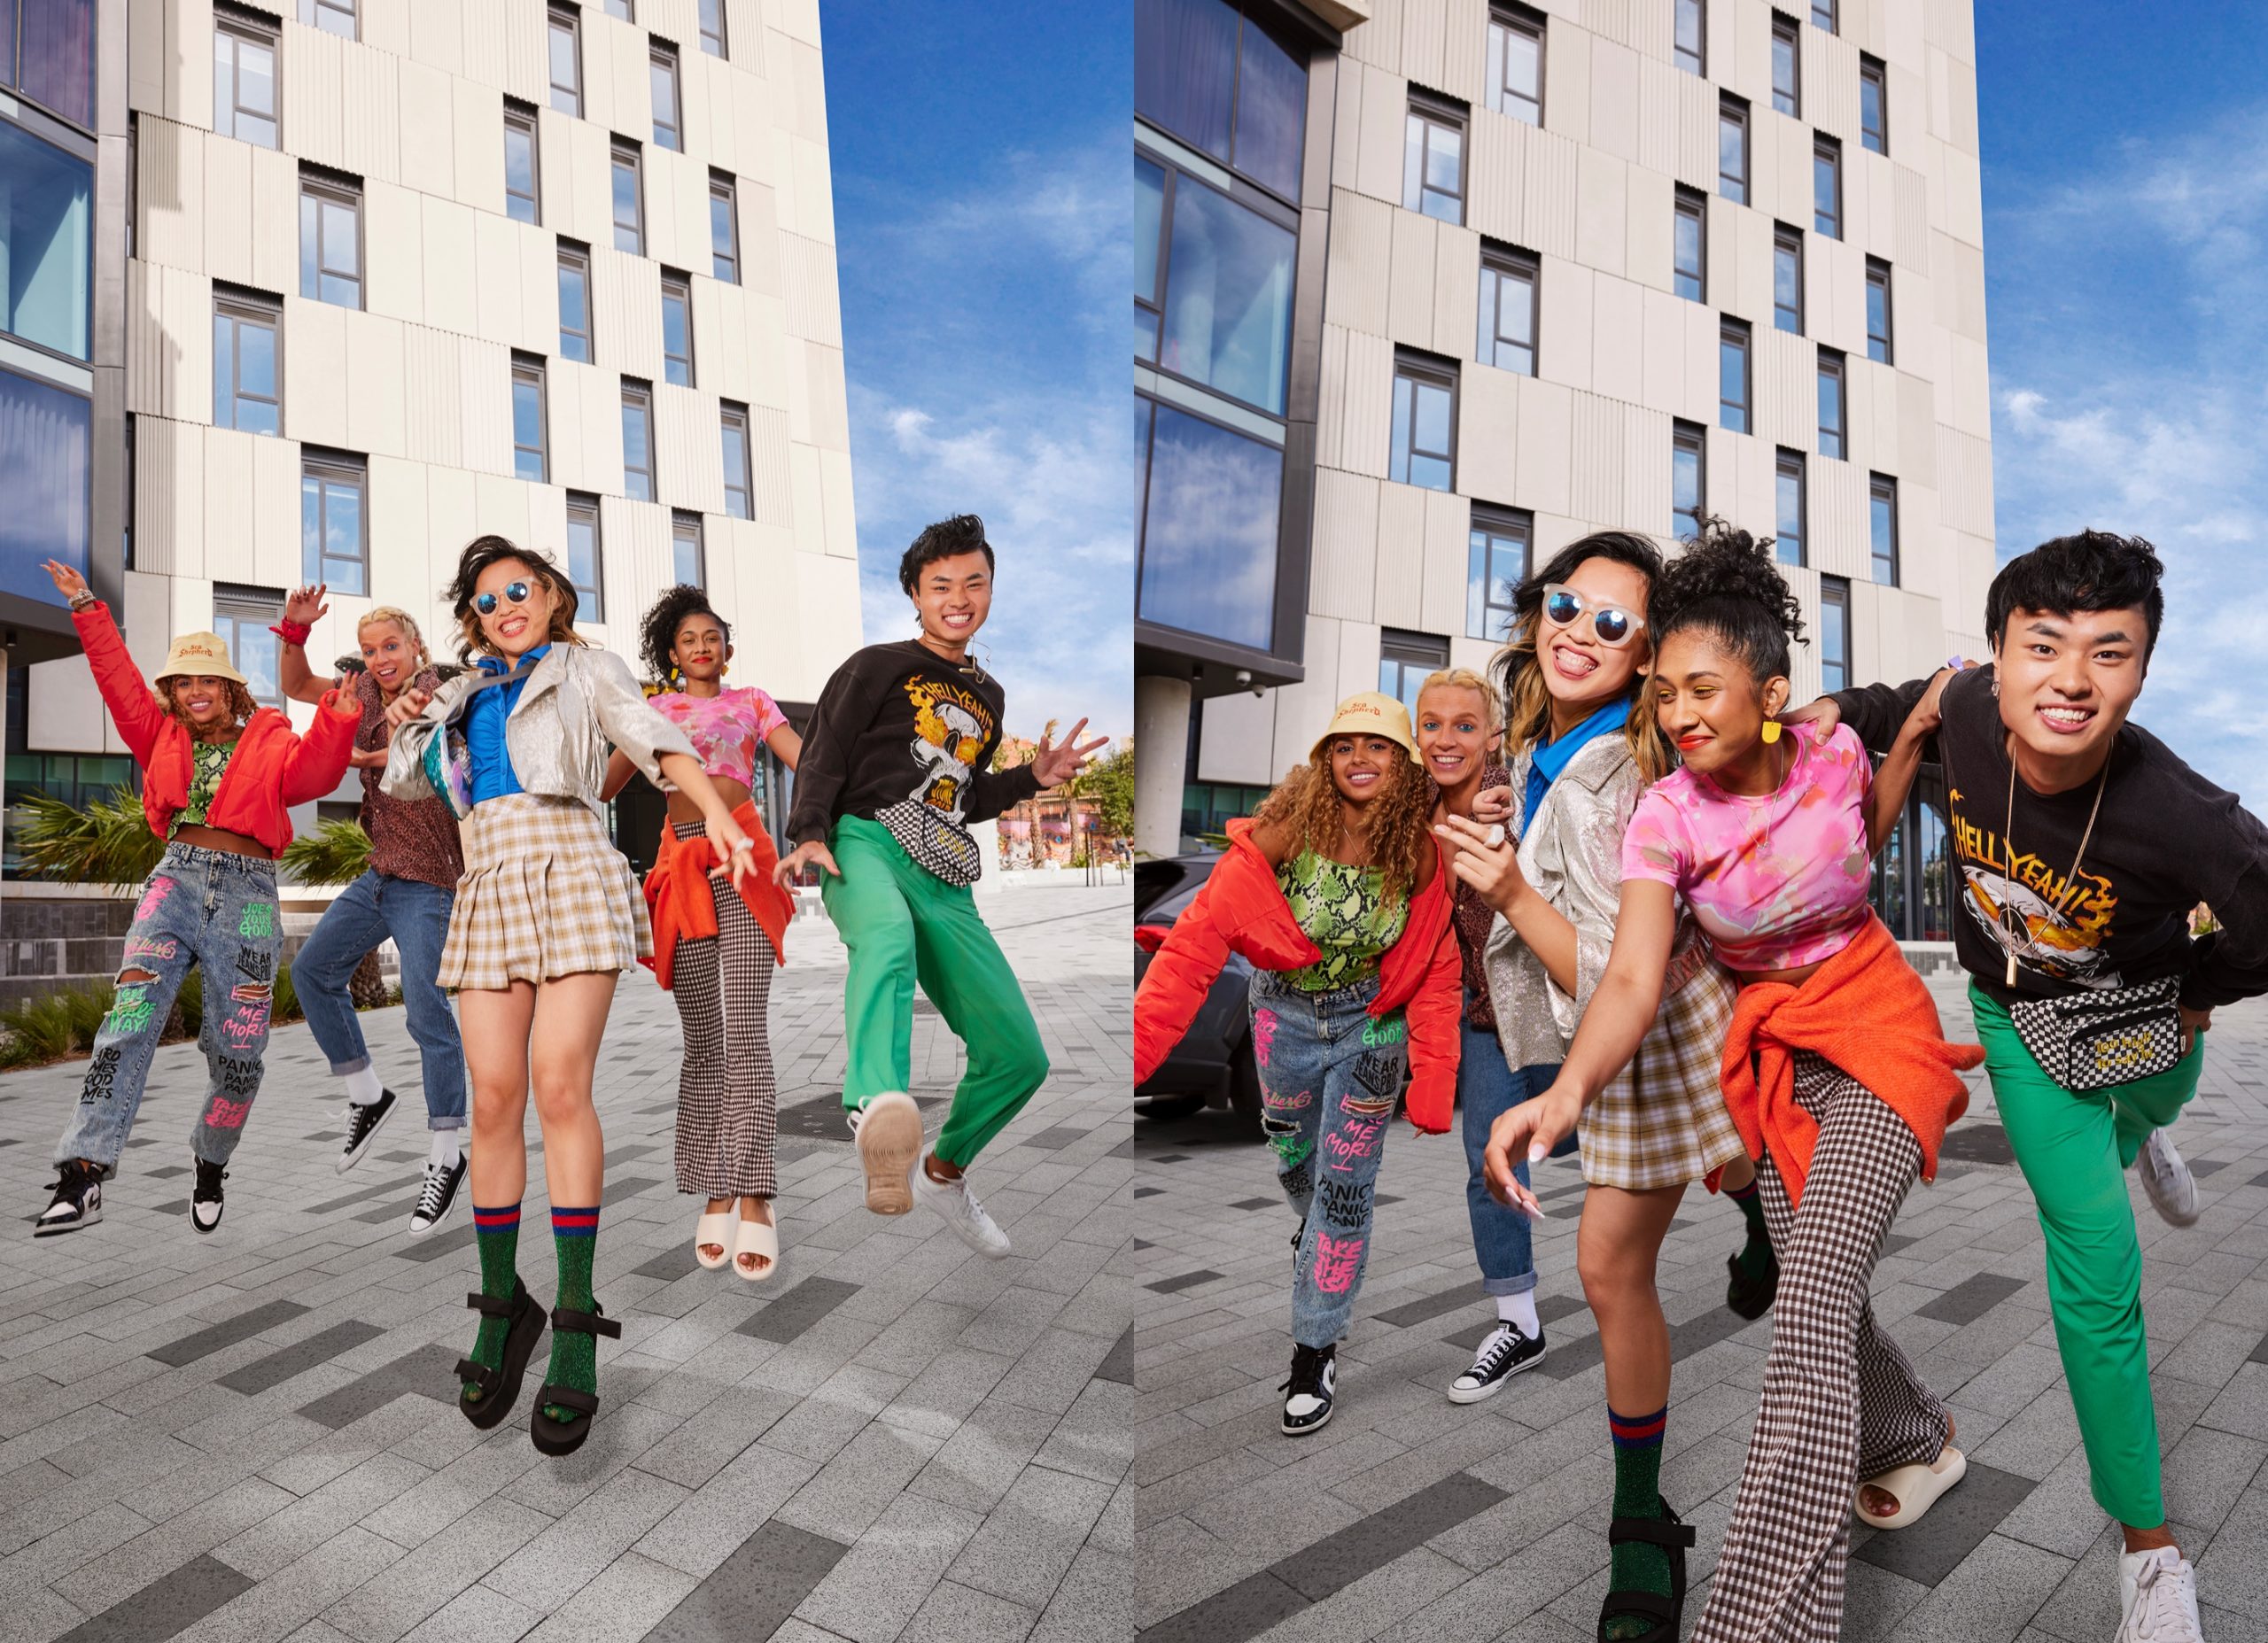 Energetic young and colorful people in front of the building